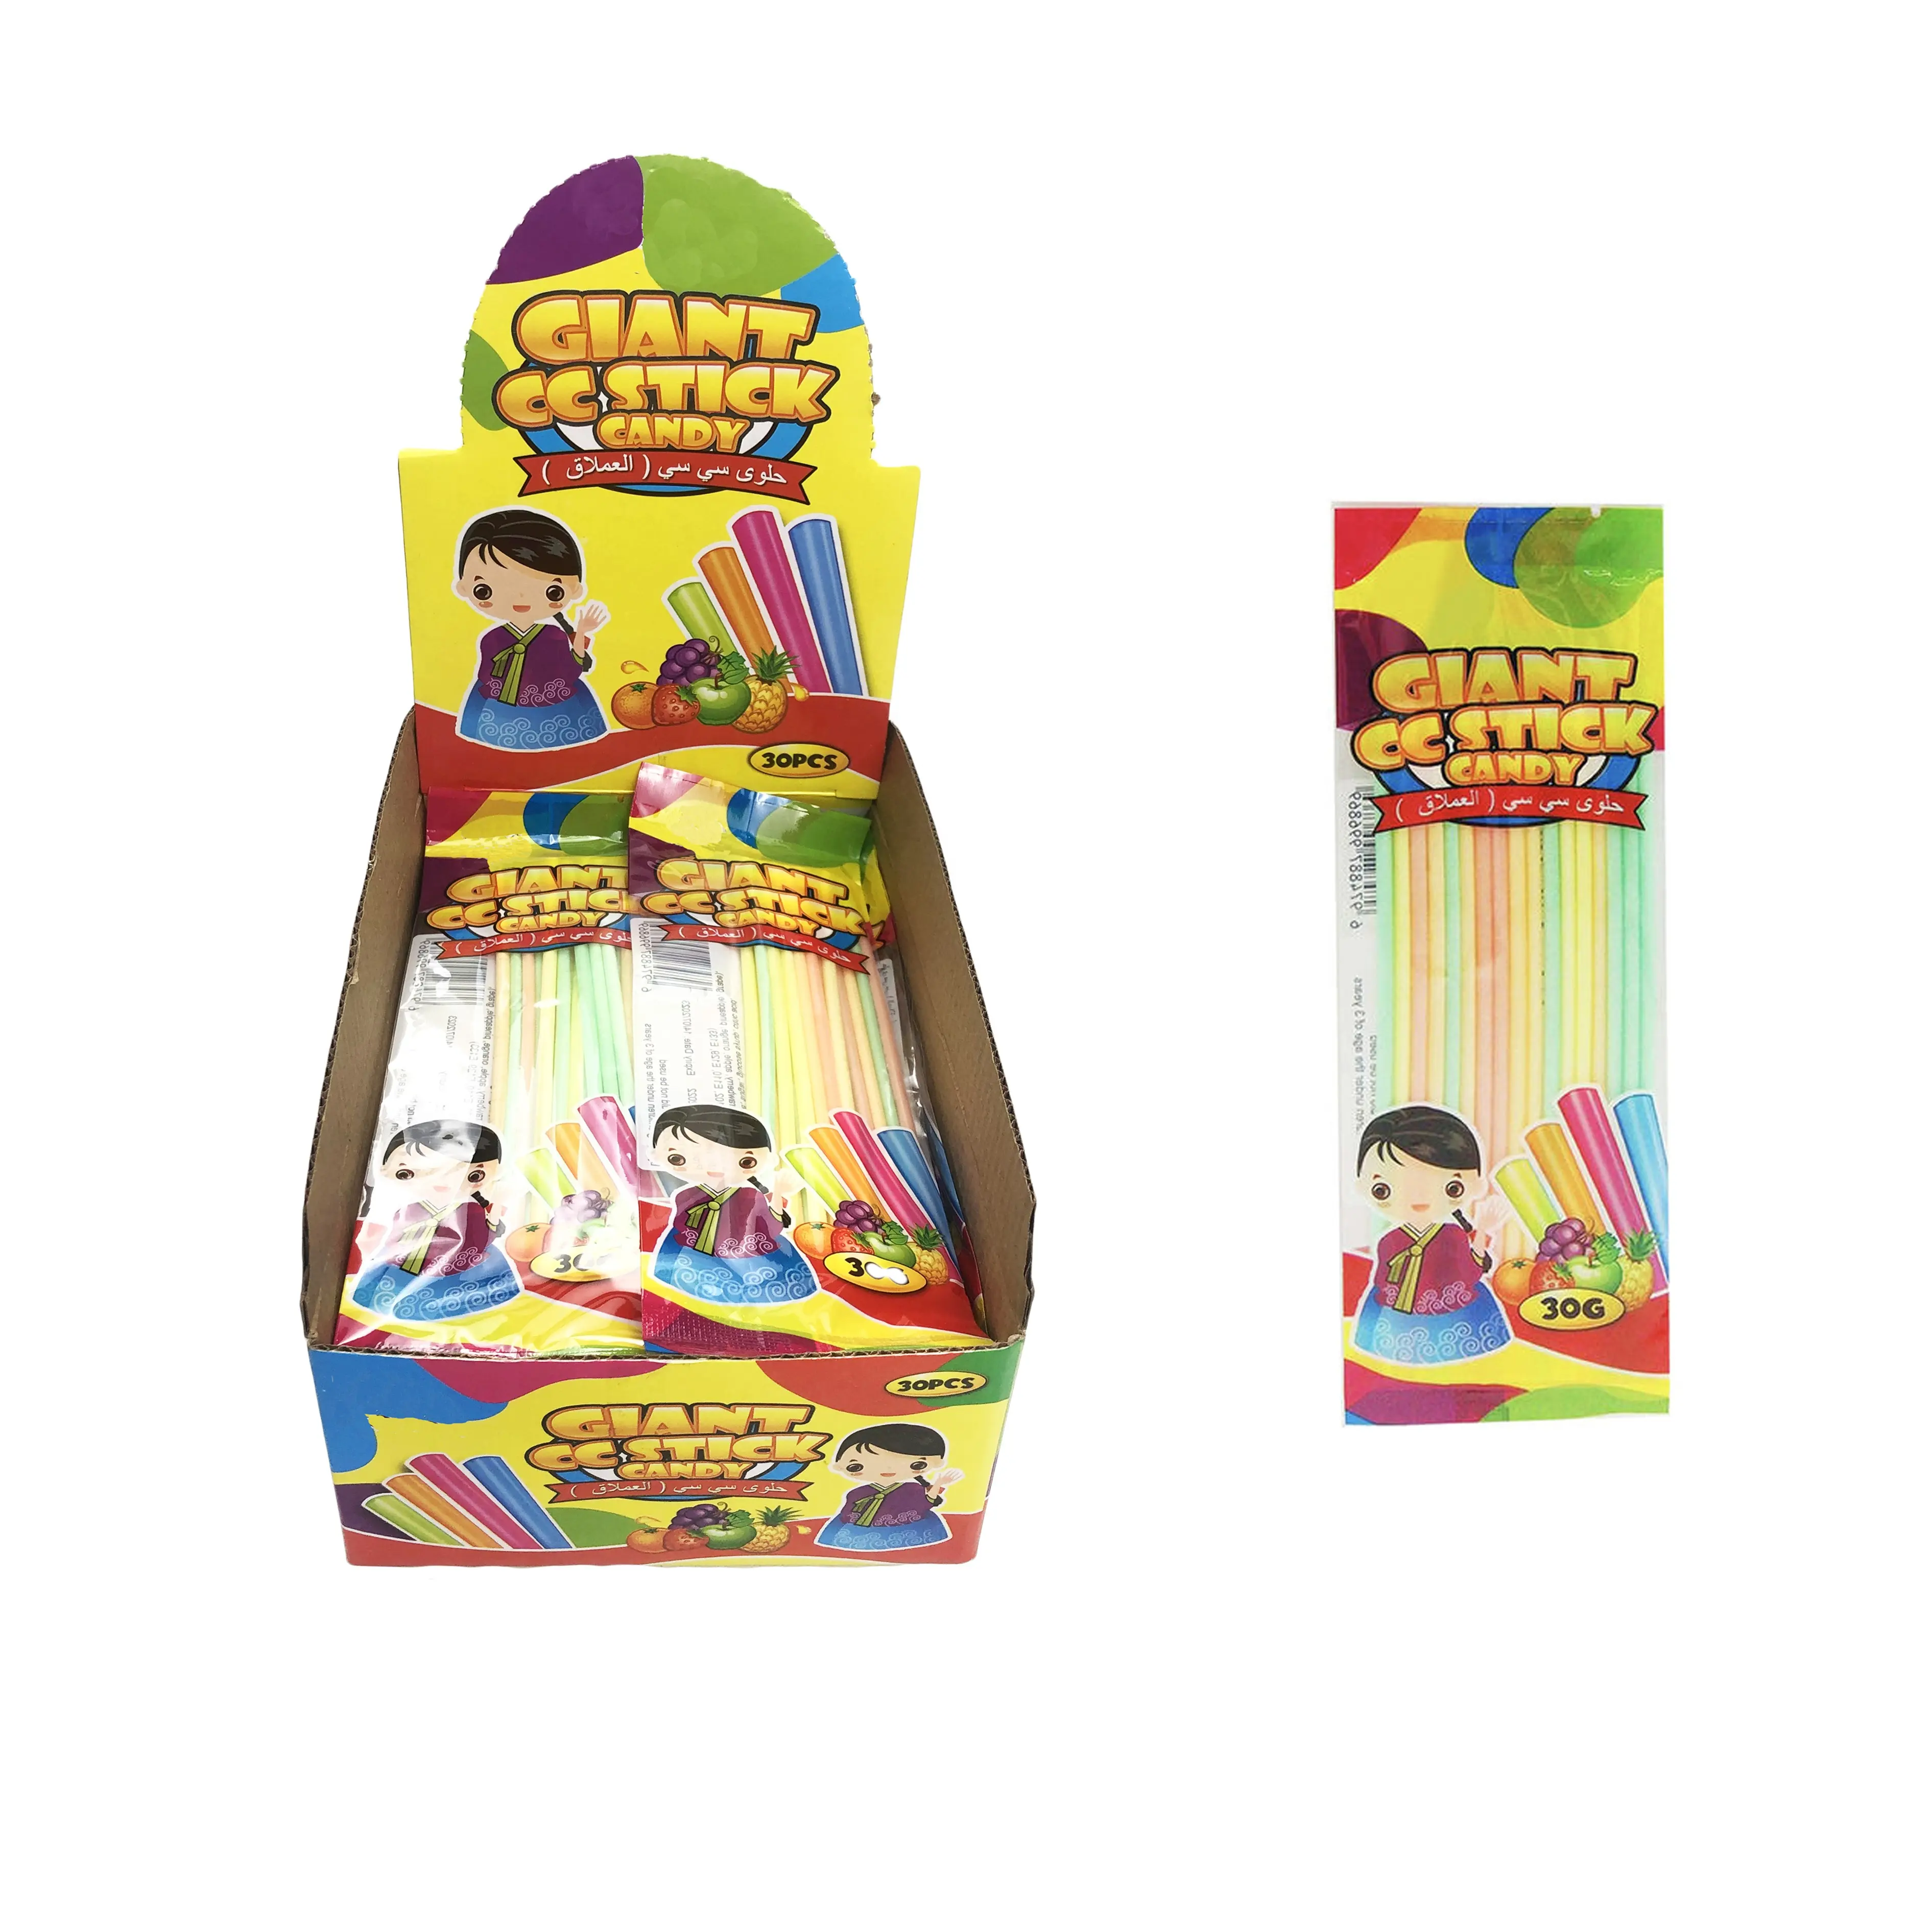 HALAL Long CC Stick Candy Fruit Flavor With Colorful CC Stick Sweet In Display Box